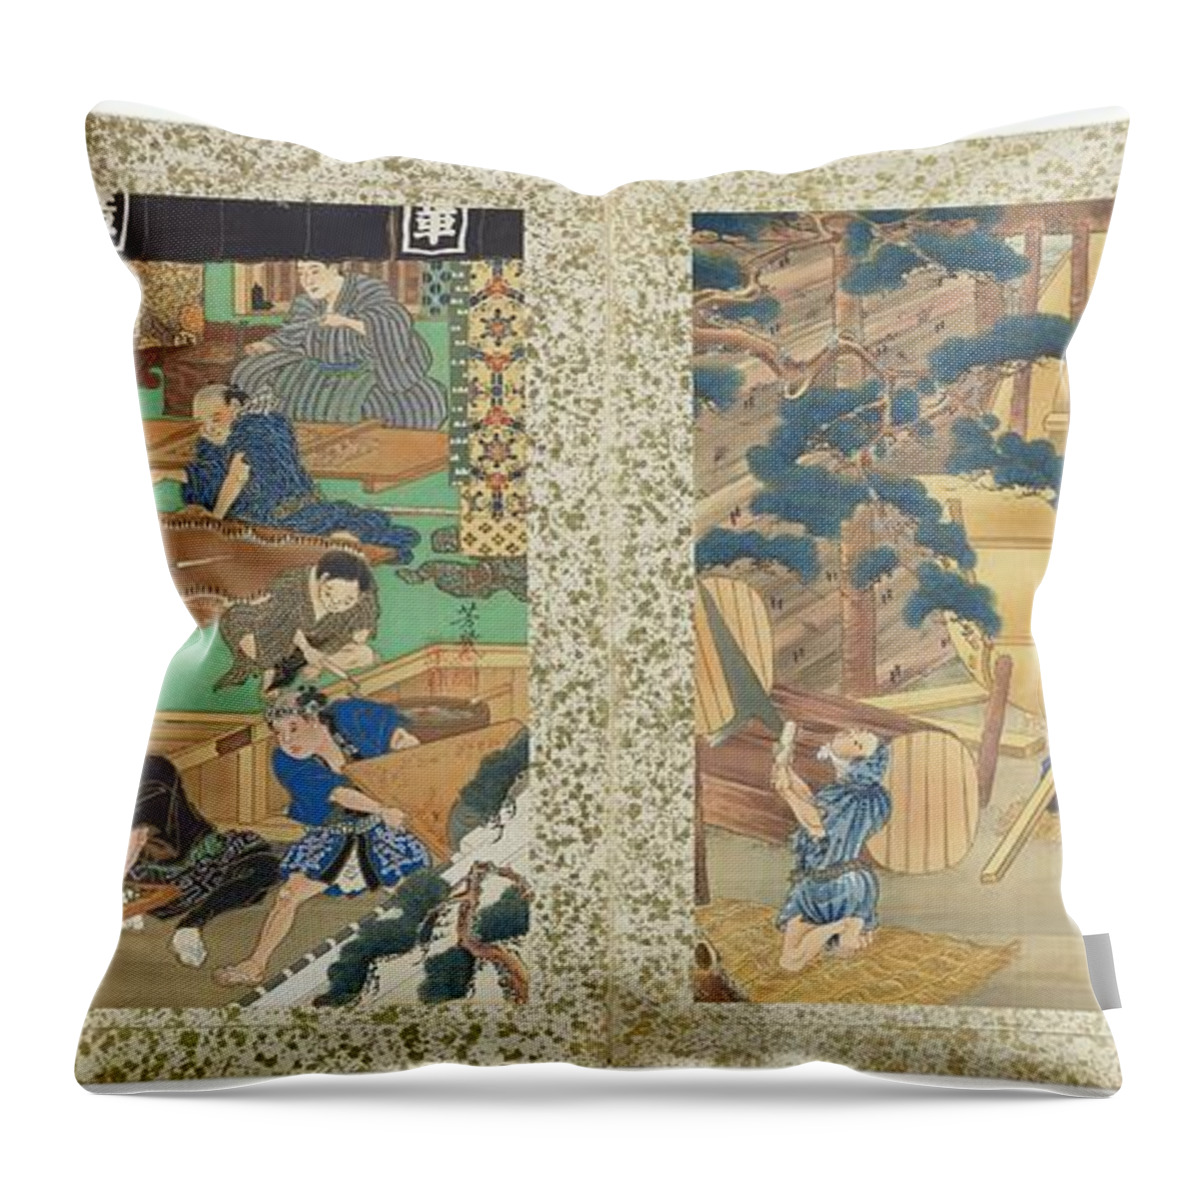 Utagawa Yoshiiku (1833–1904) Artisans And Events Of The Twelve Months 3 Throw Pillow featuring the painting Utagawa Yoshiiku by Artistic Rifki